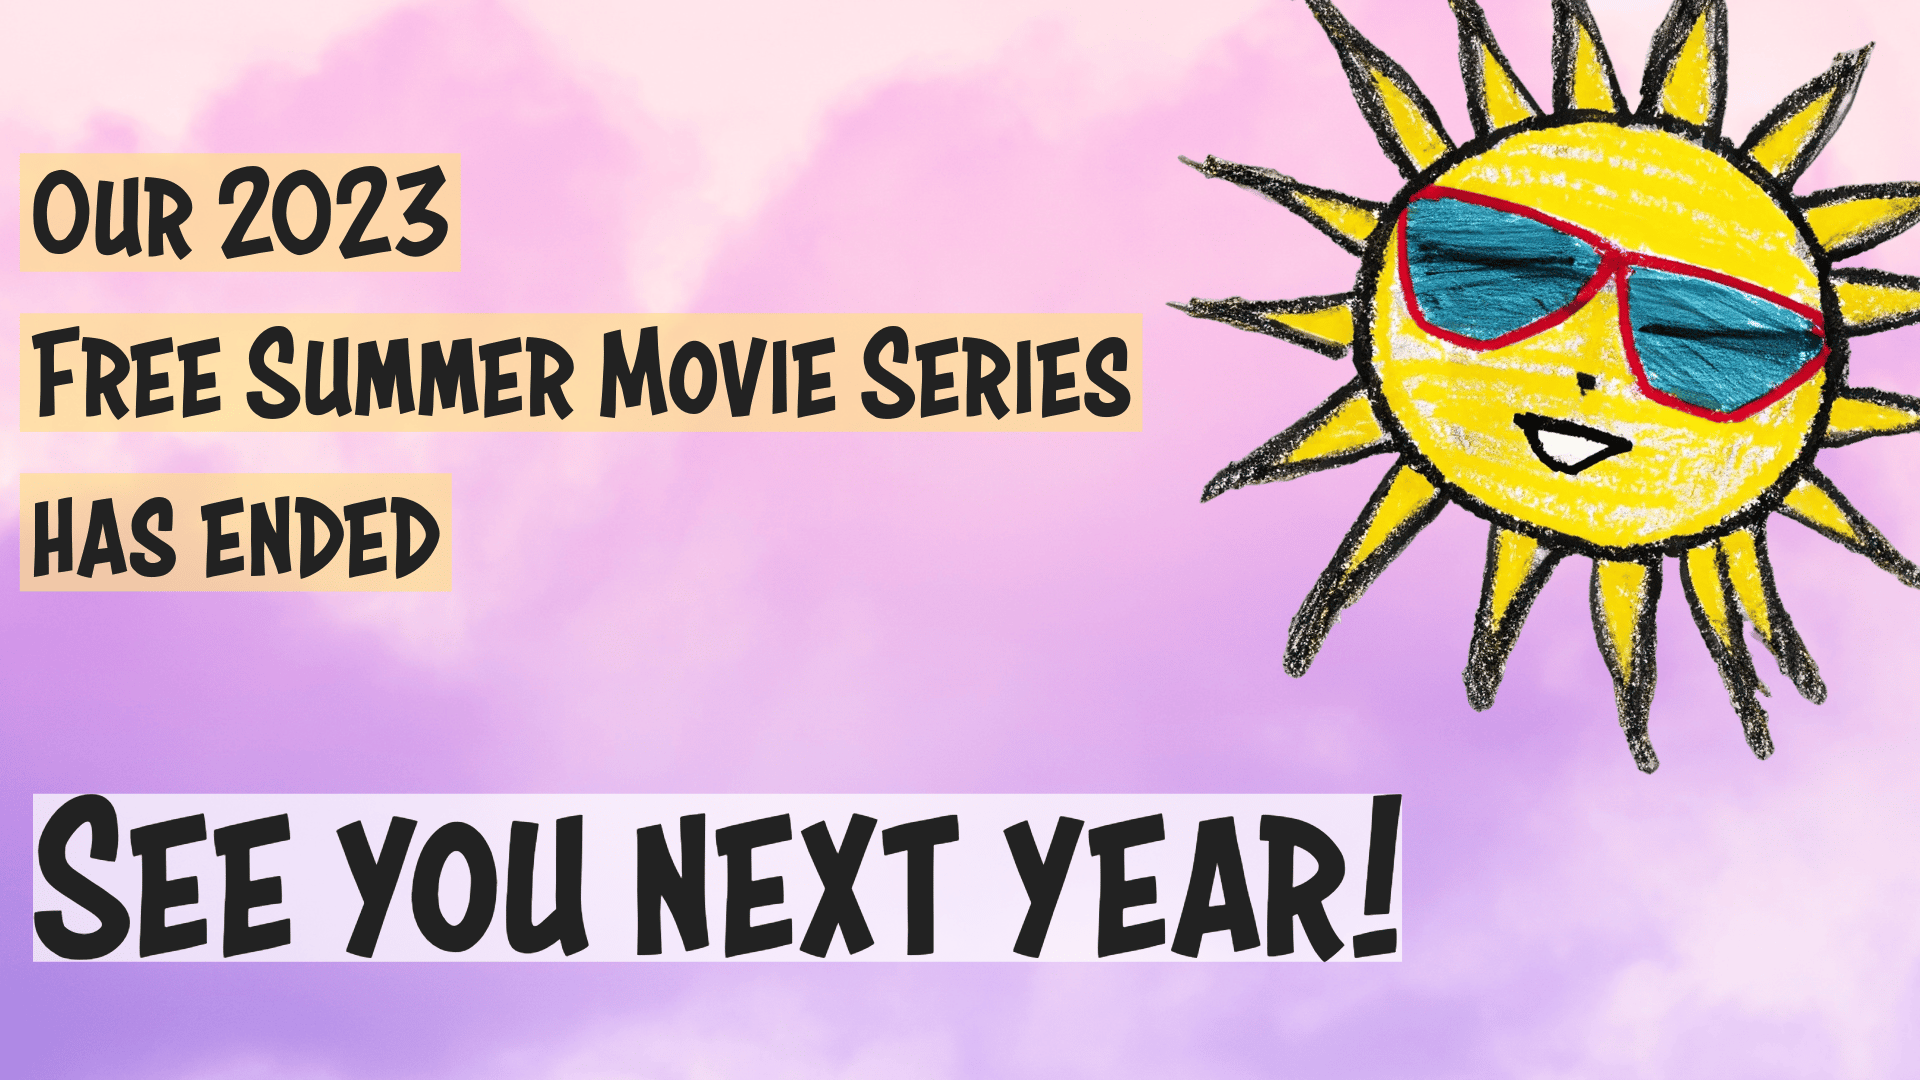 Image of a Smiling sun with words that read as follows: "Our 2023 Free Summer Movie Series has ended. See you next year!"